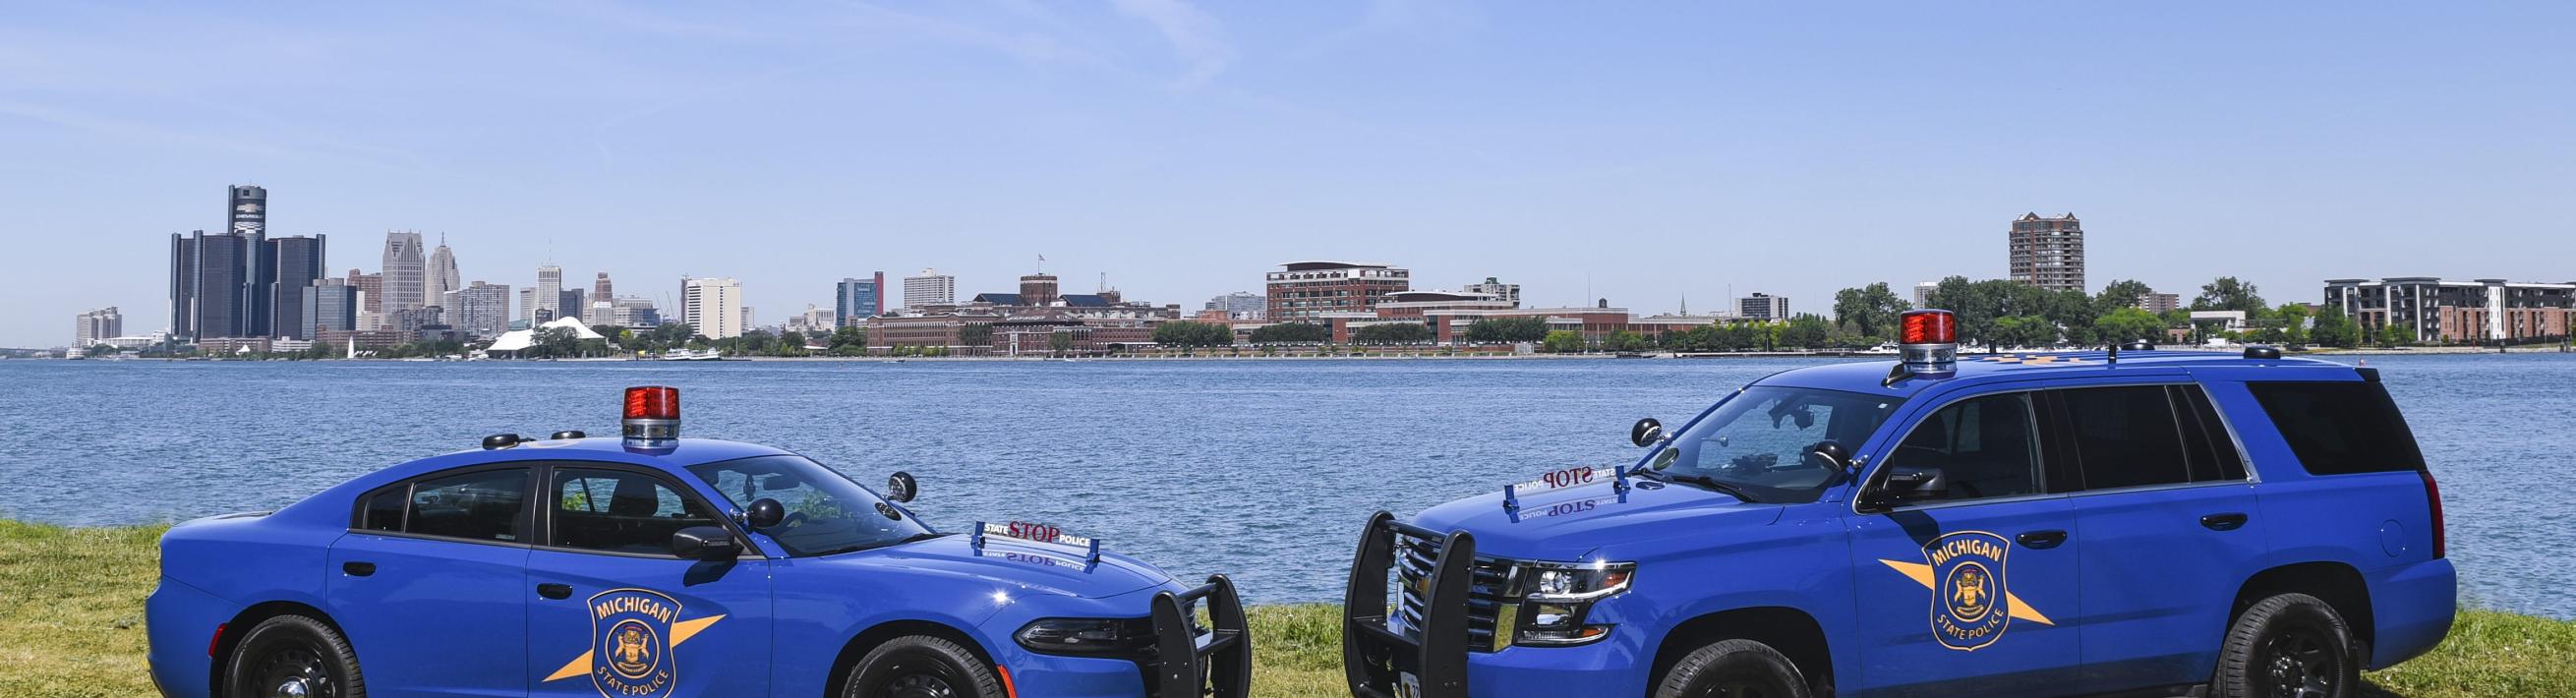 State of Michigan police cars parked on Belle Isle